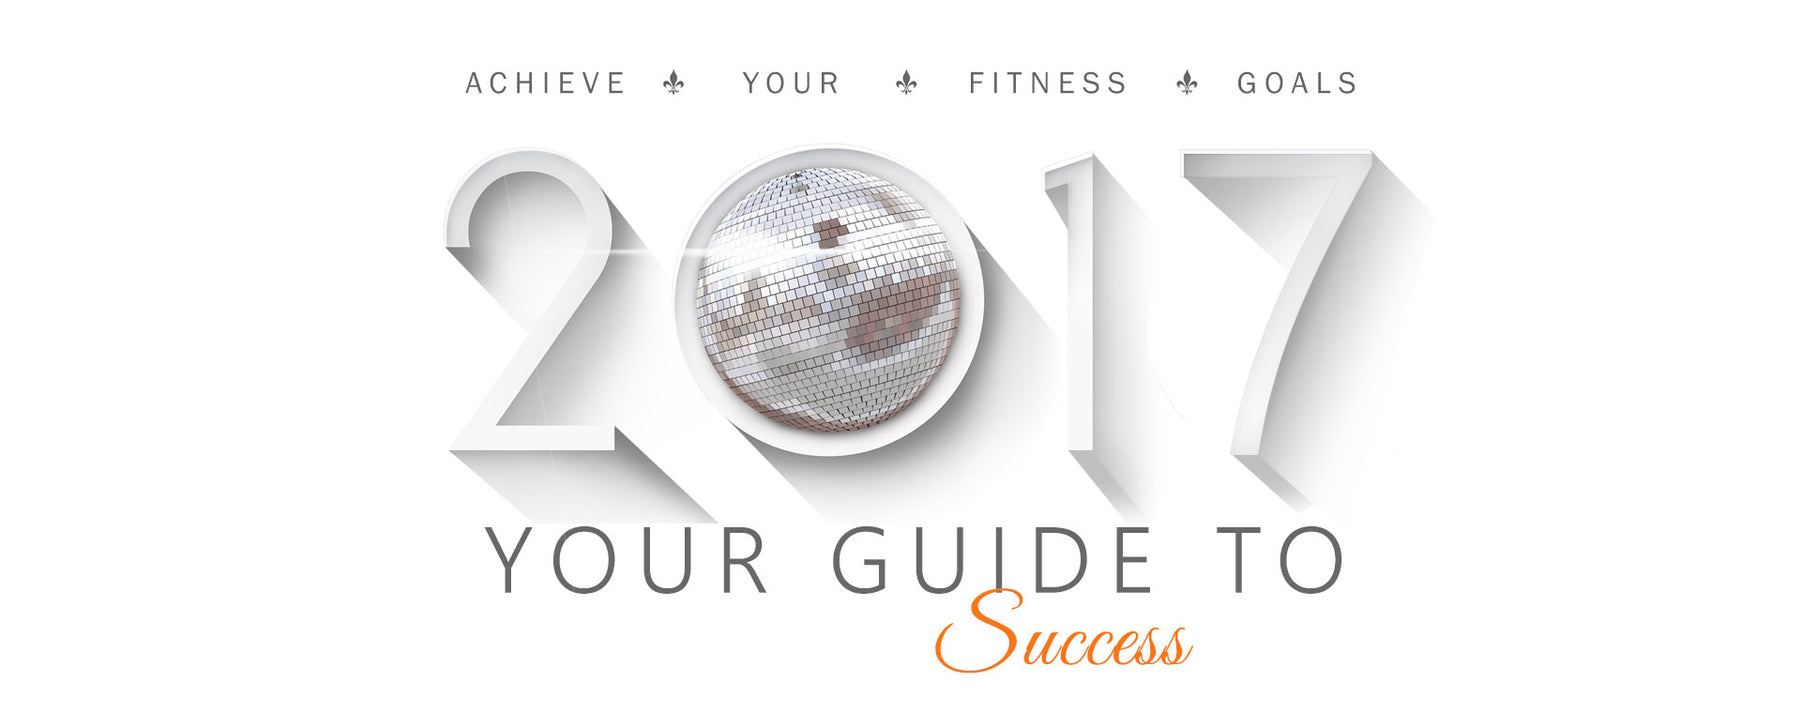 Achieve Your New Year's Weight Loss & Fitness Goals